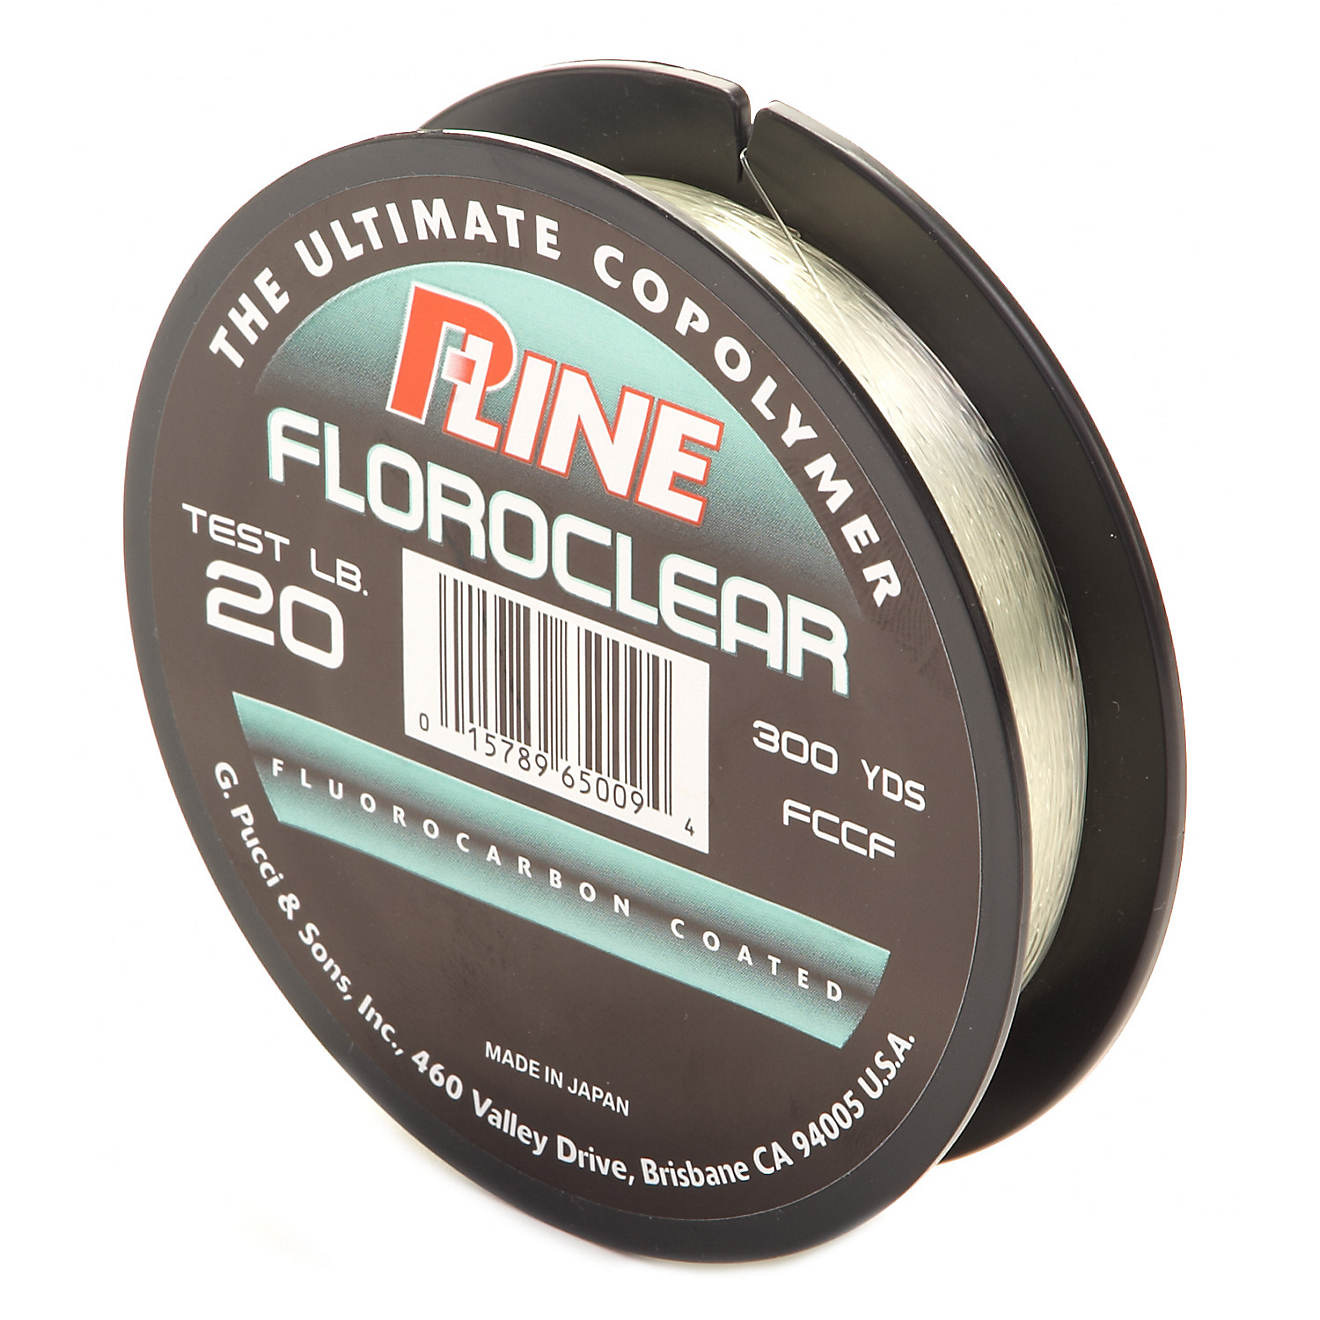 P-Line® Floroclear 20 lb. - 300 yards Fluorocarbon Fishing Line                                                                 - view number 1